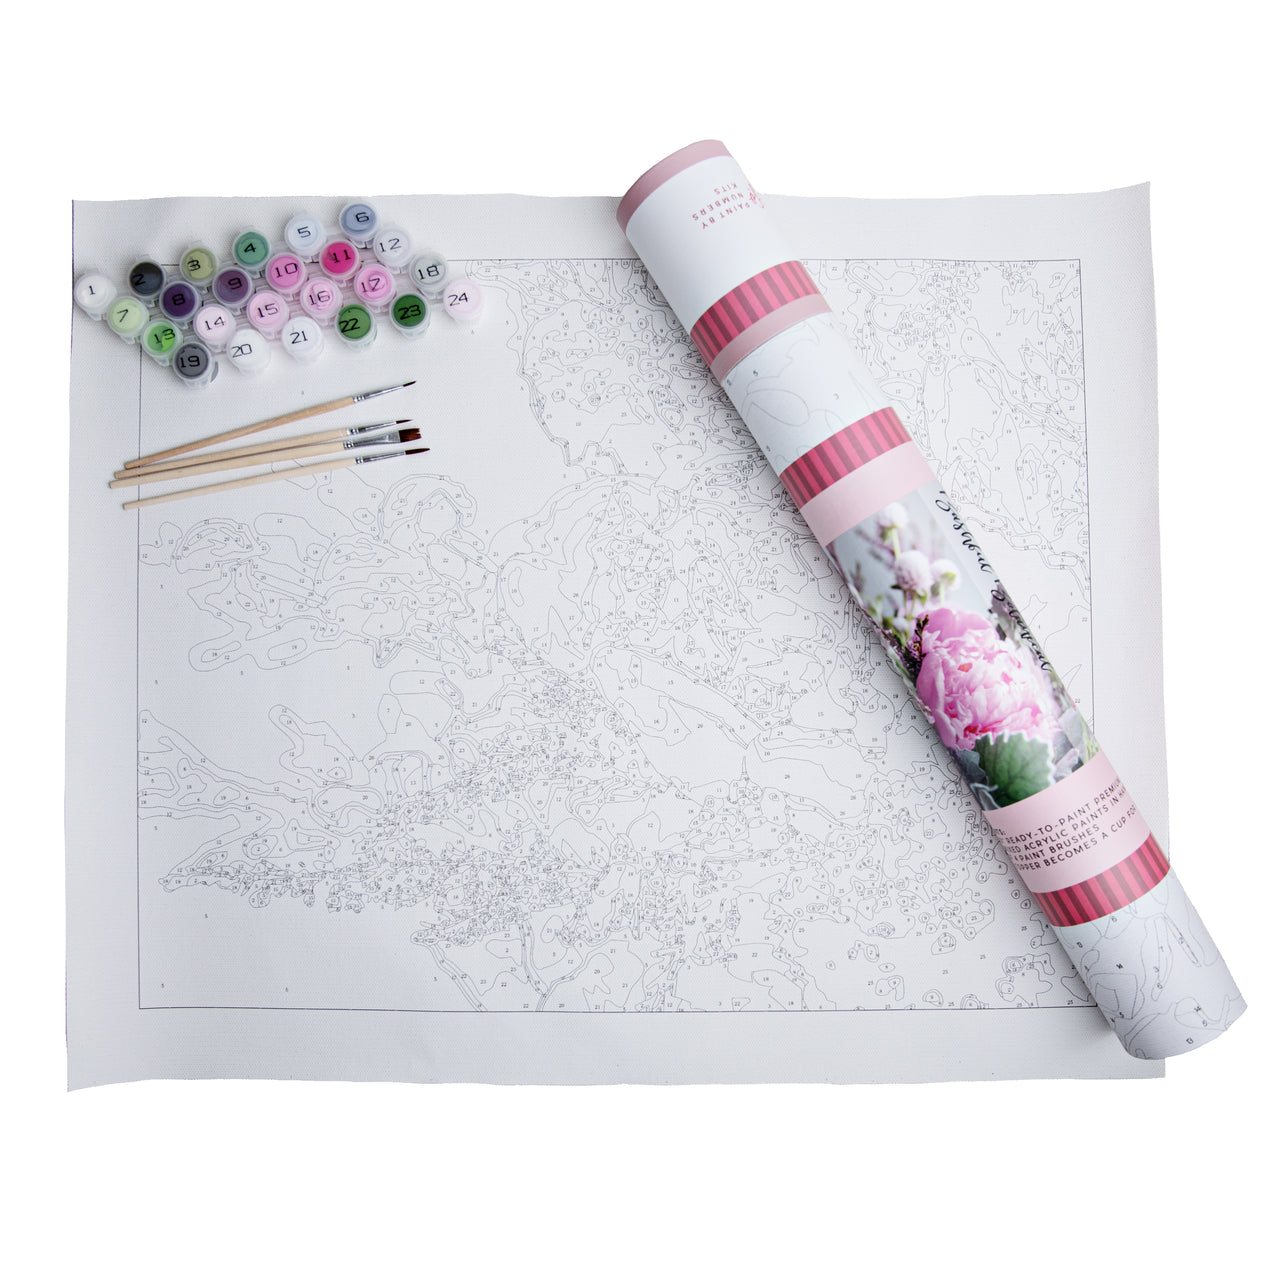 Iconix Adult Paint by Numbers with Frame - Garden Goodness